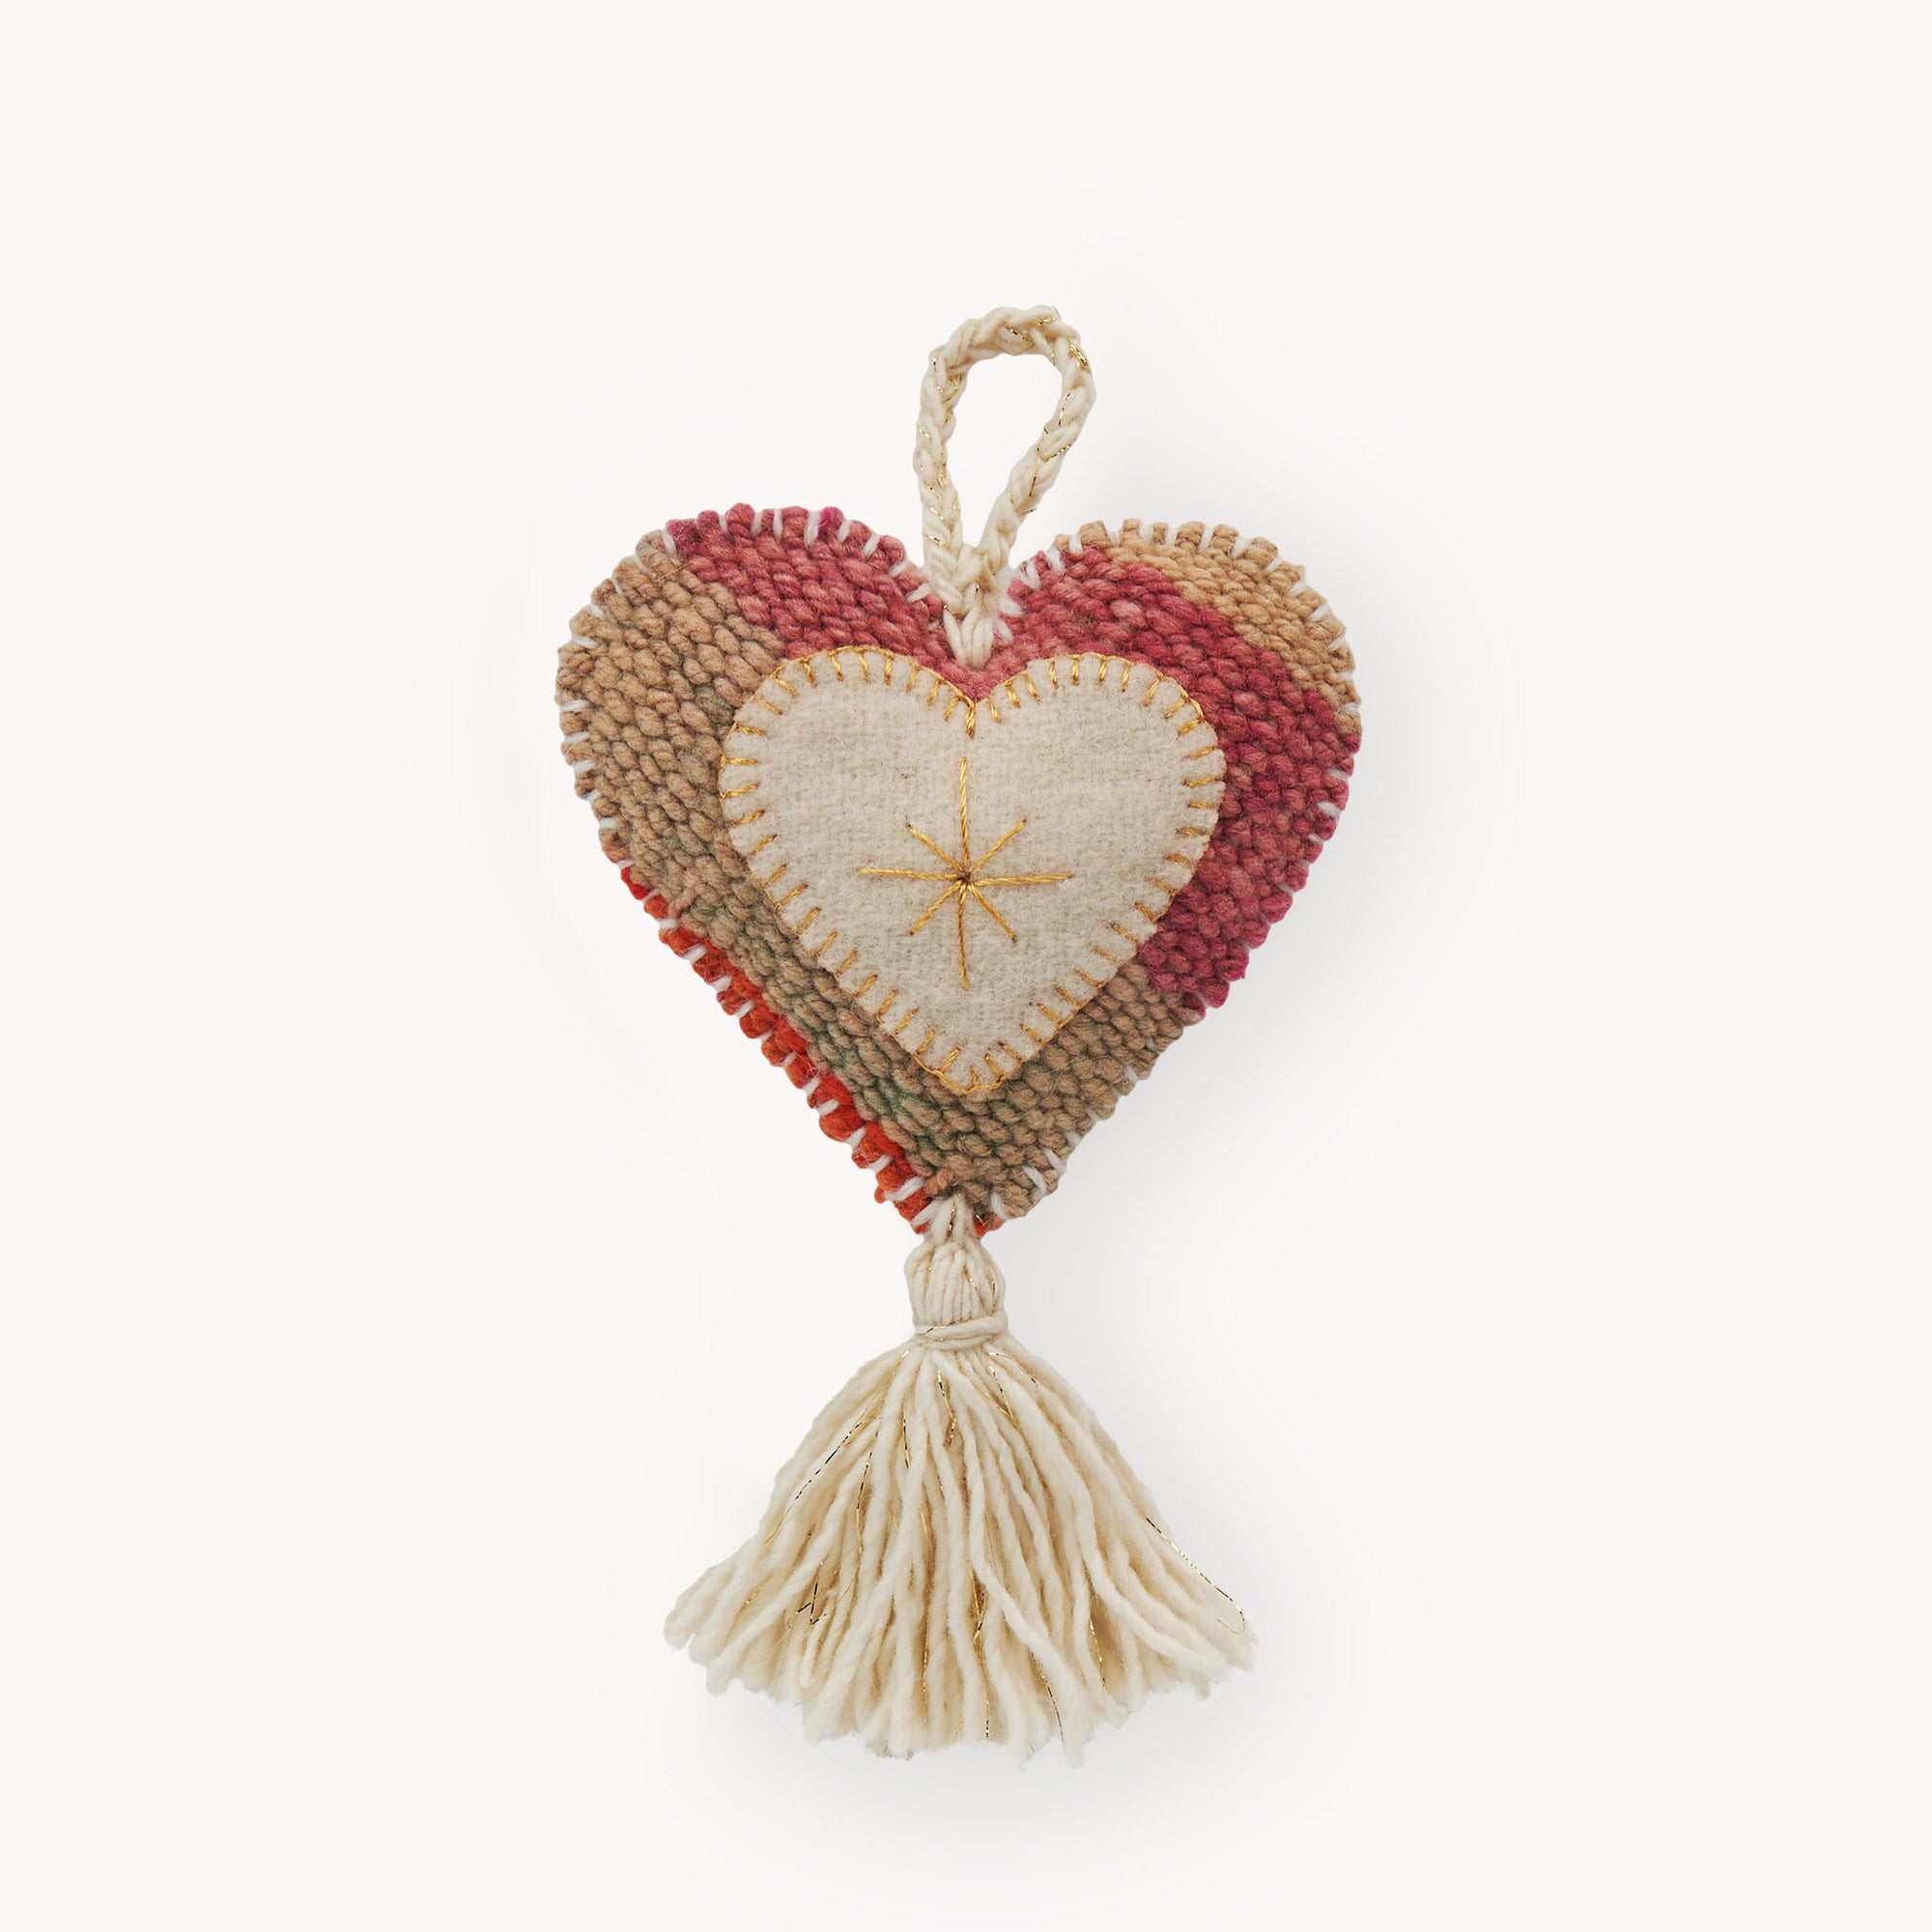 Vintage Heart Hand Embroidered Ornament